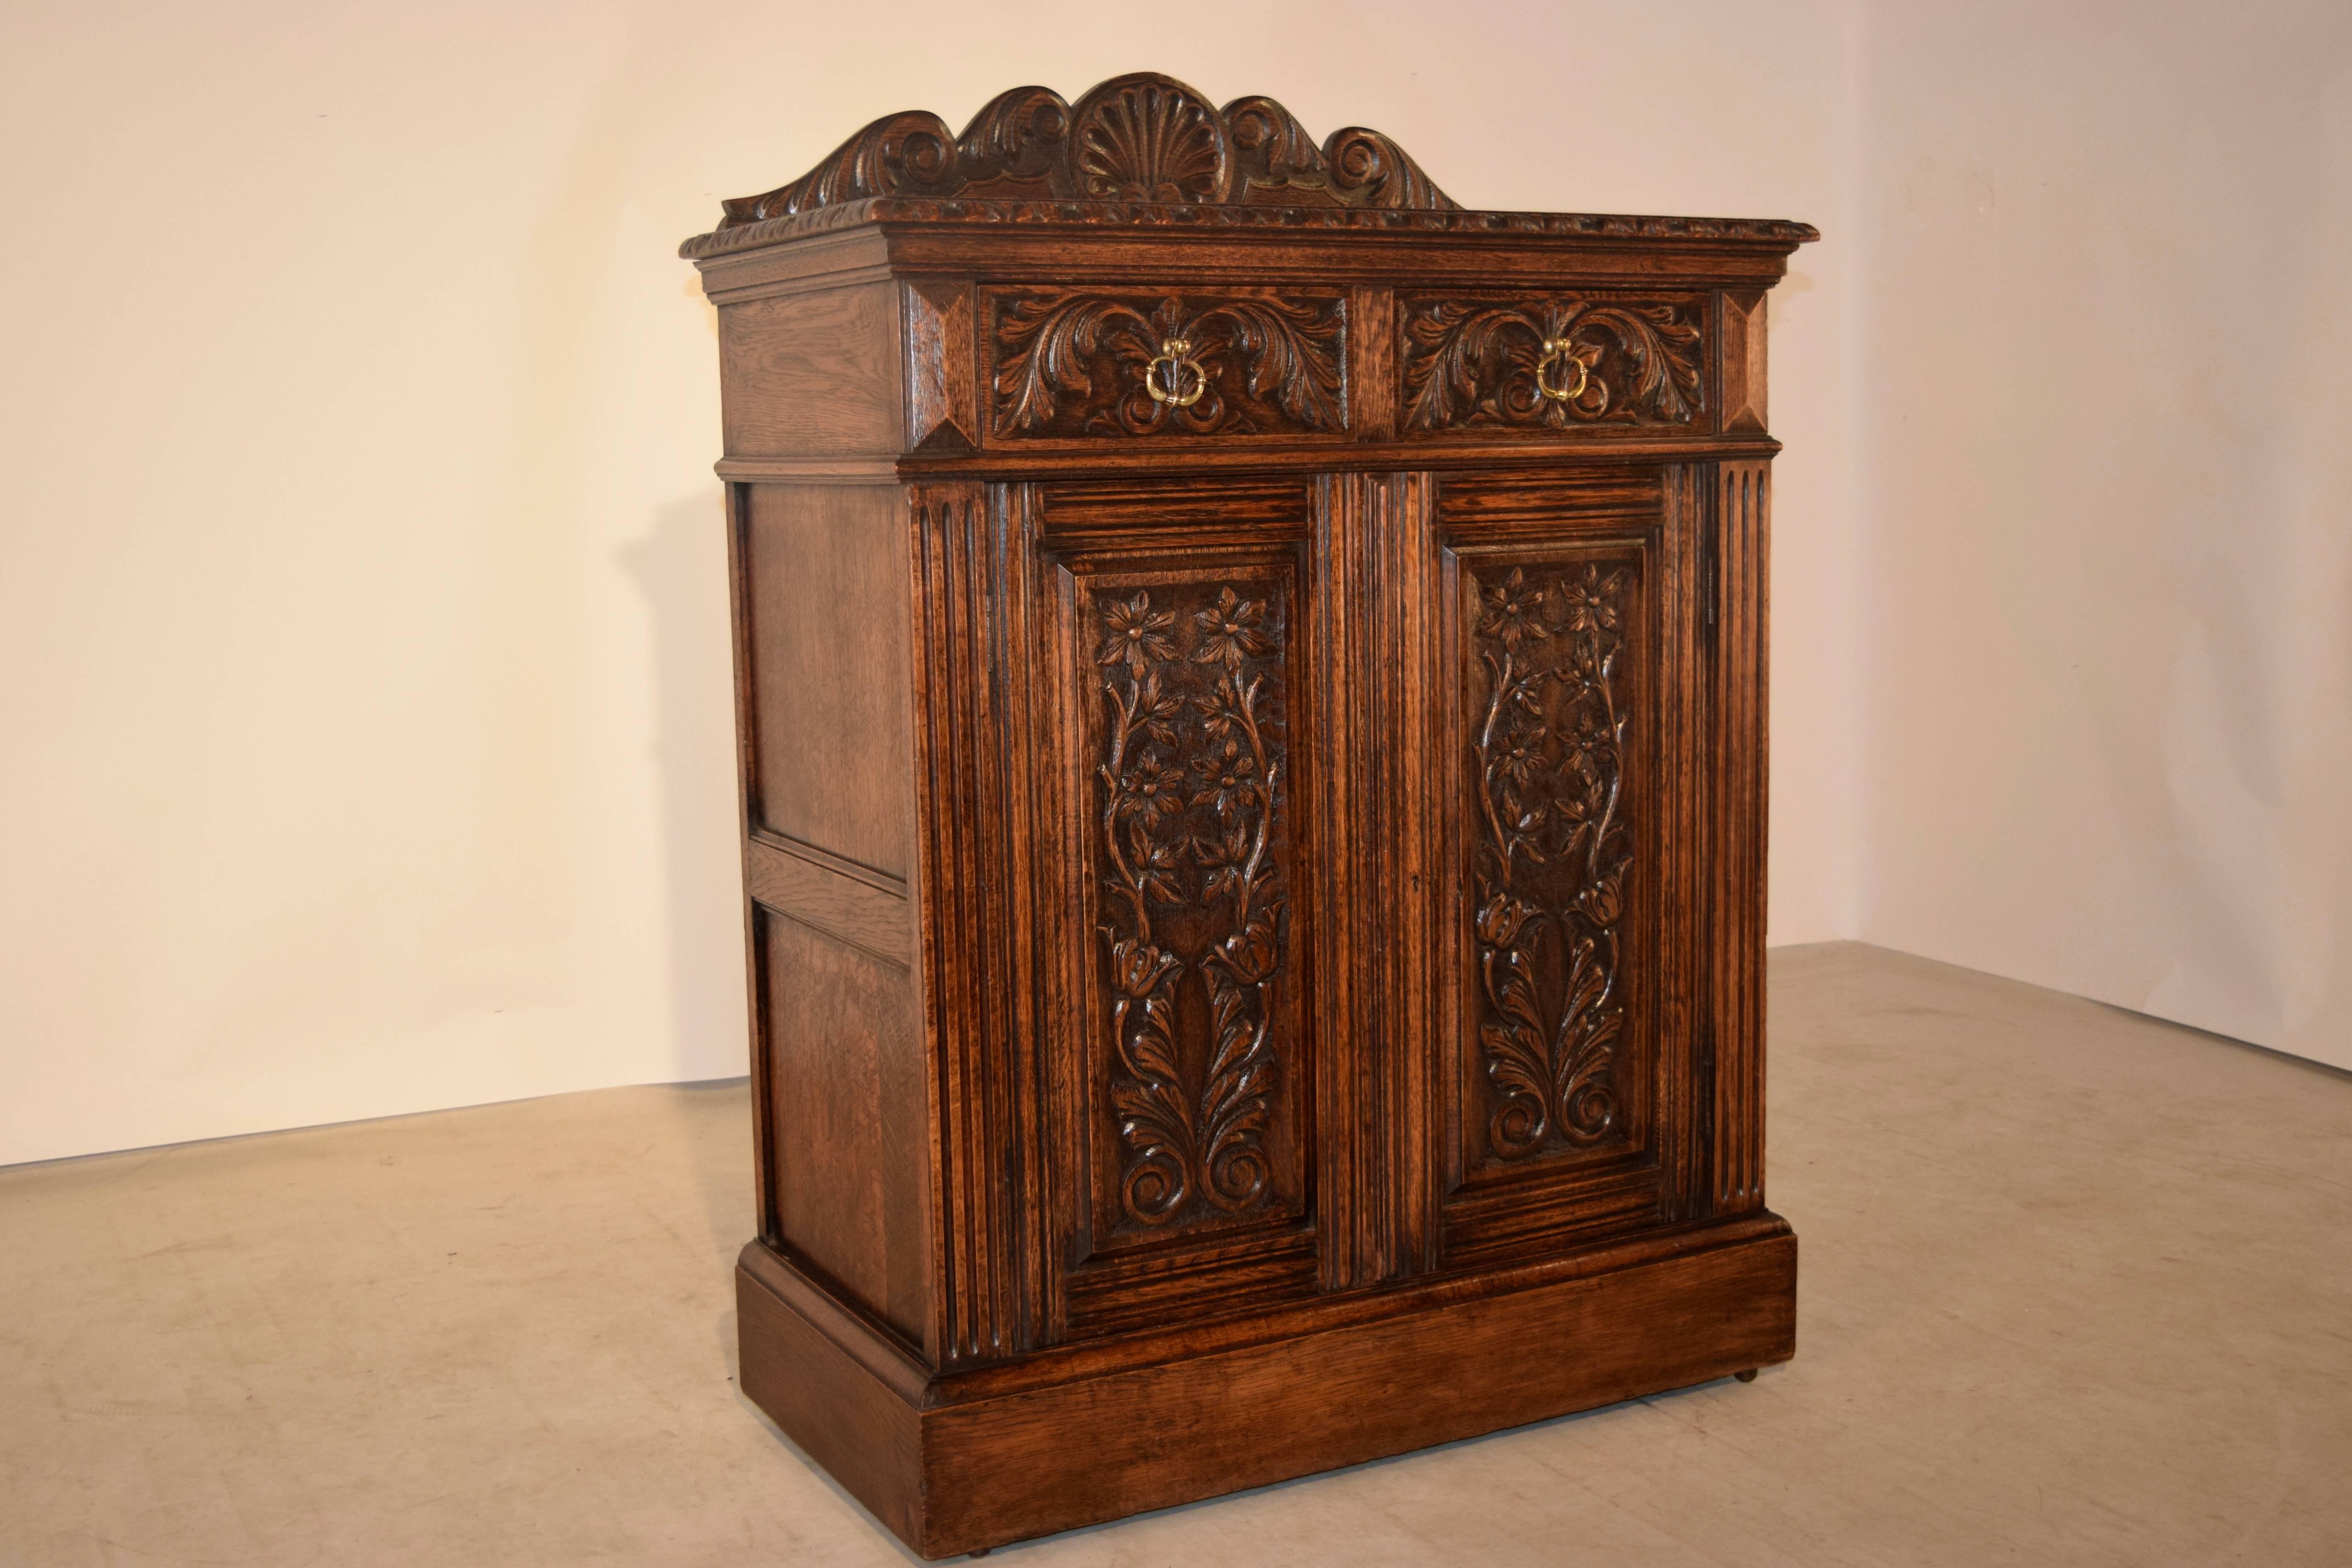 19th century English cupboard made from oak. The top is decorated with a hand-carved backsplash, and a beveled and hand-carved edge, following down to two drawers over two doors, all with hand-carved floral decoration. The doors open to reveal